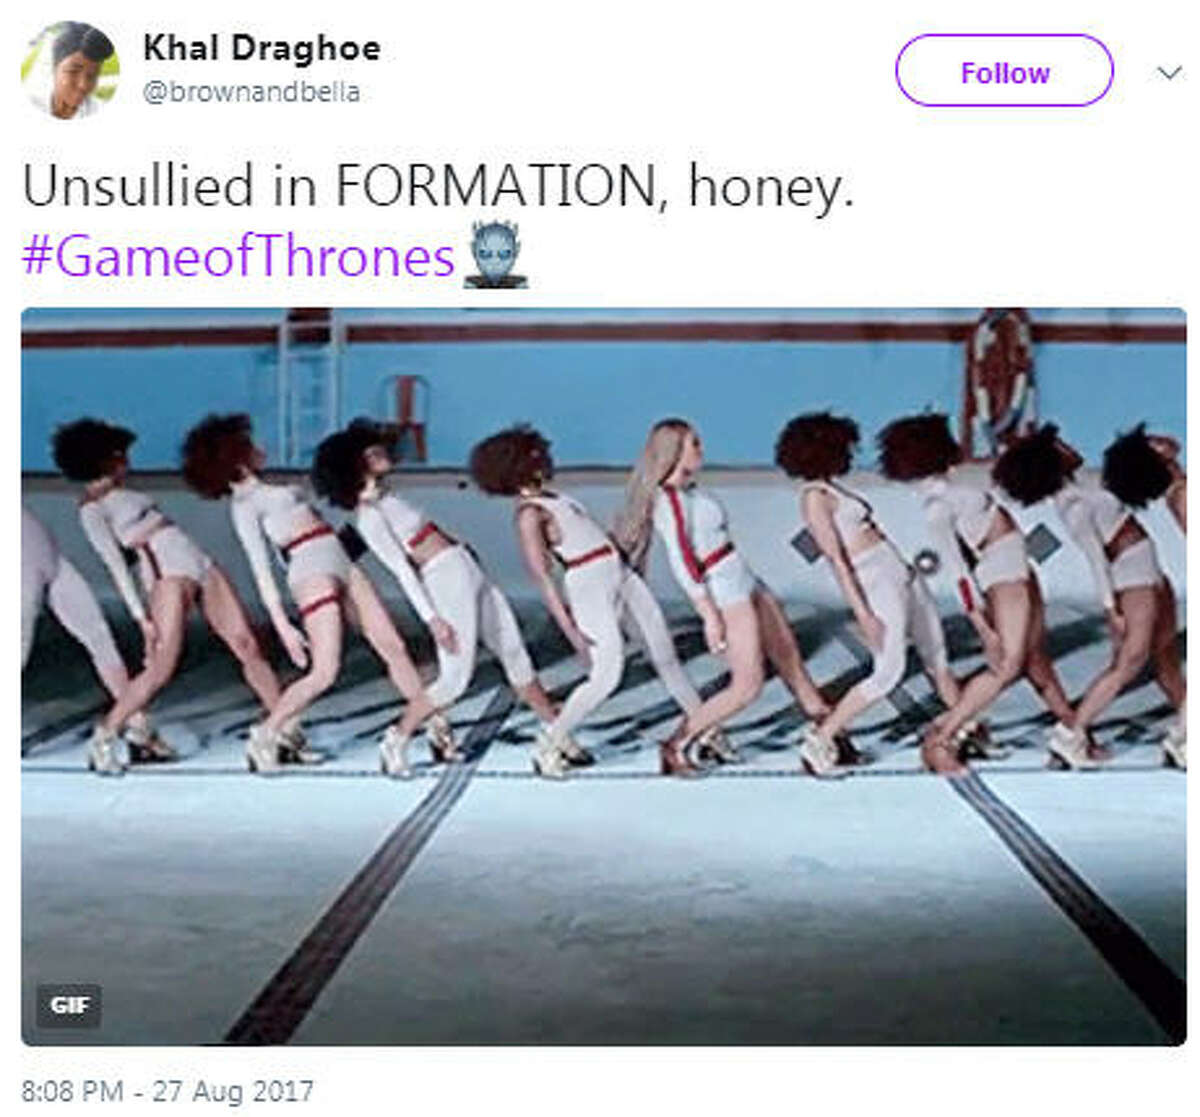 "Unsullied in FORMATION, honey. #GameofThrones" Source: Twitter